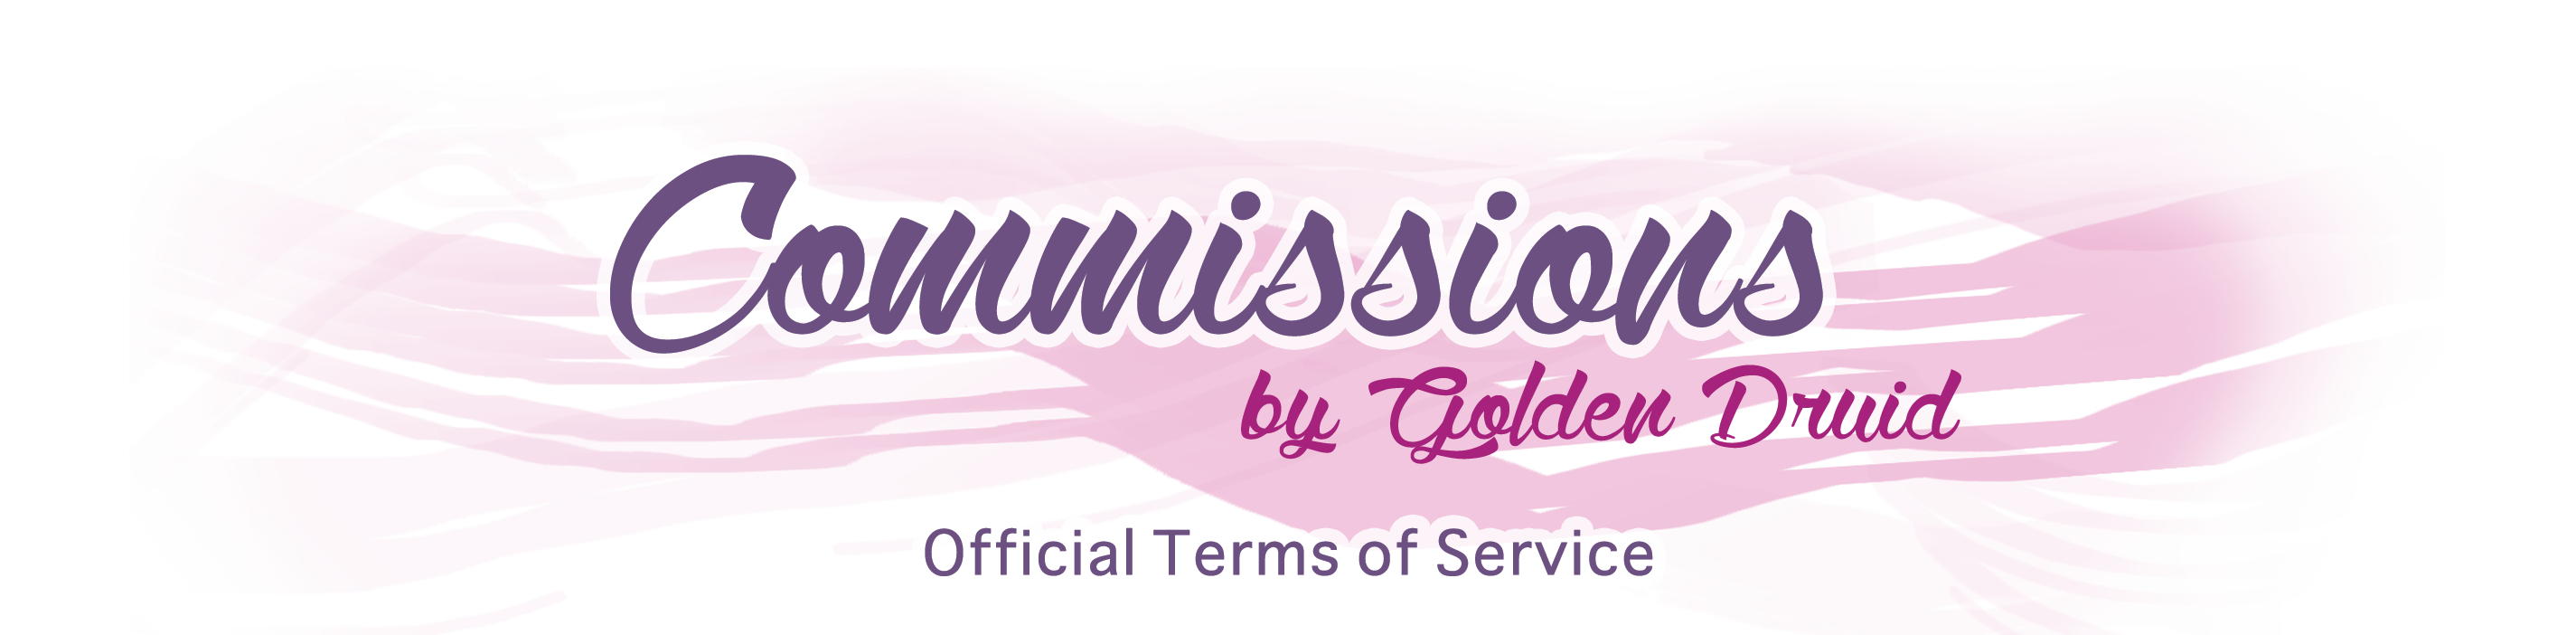 Commissions by GoldenDruid - Official Terms of Service